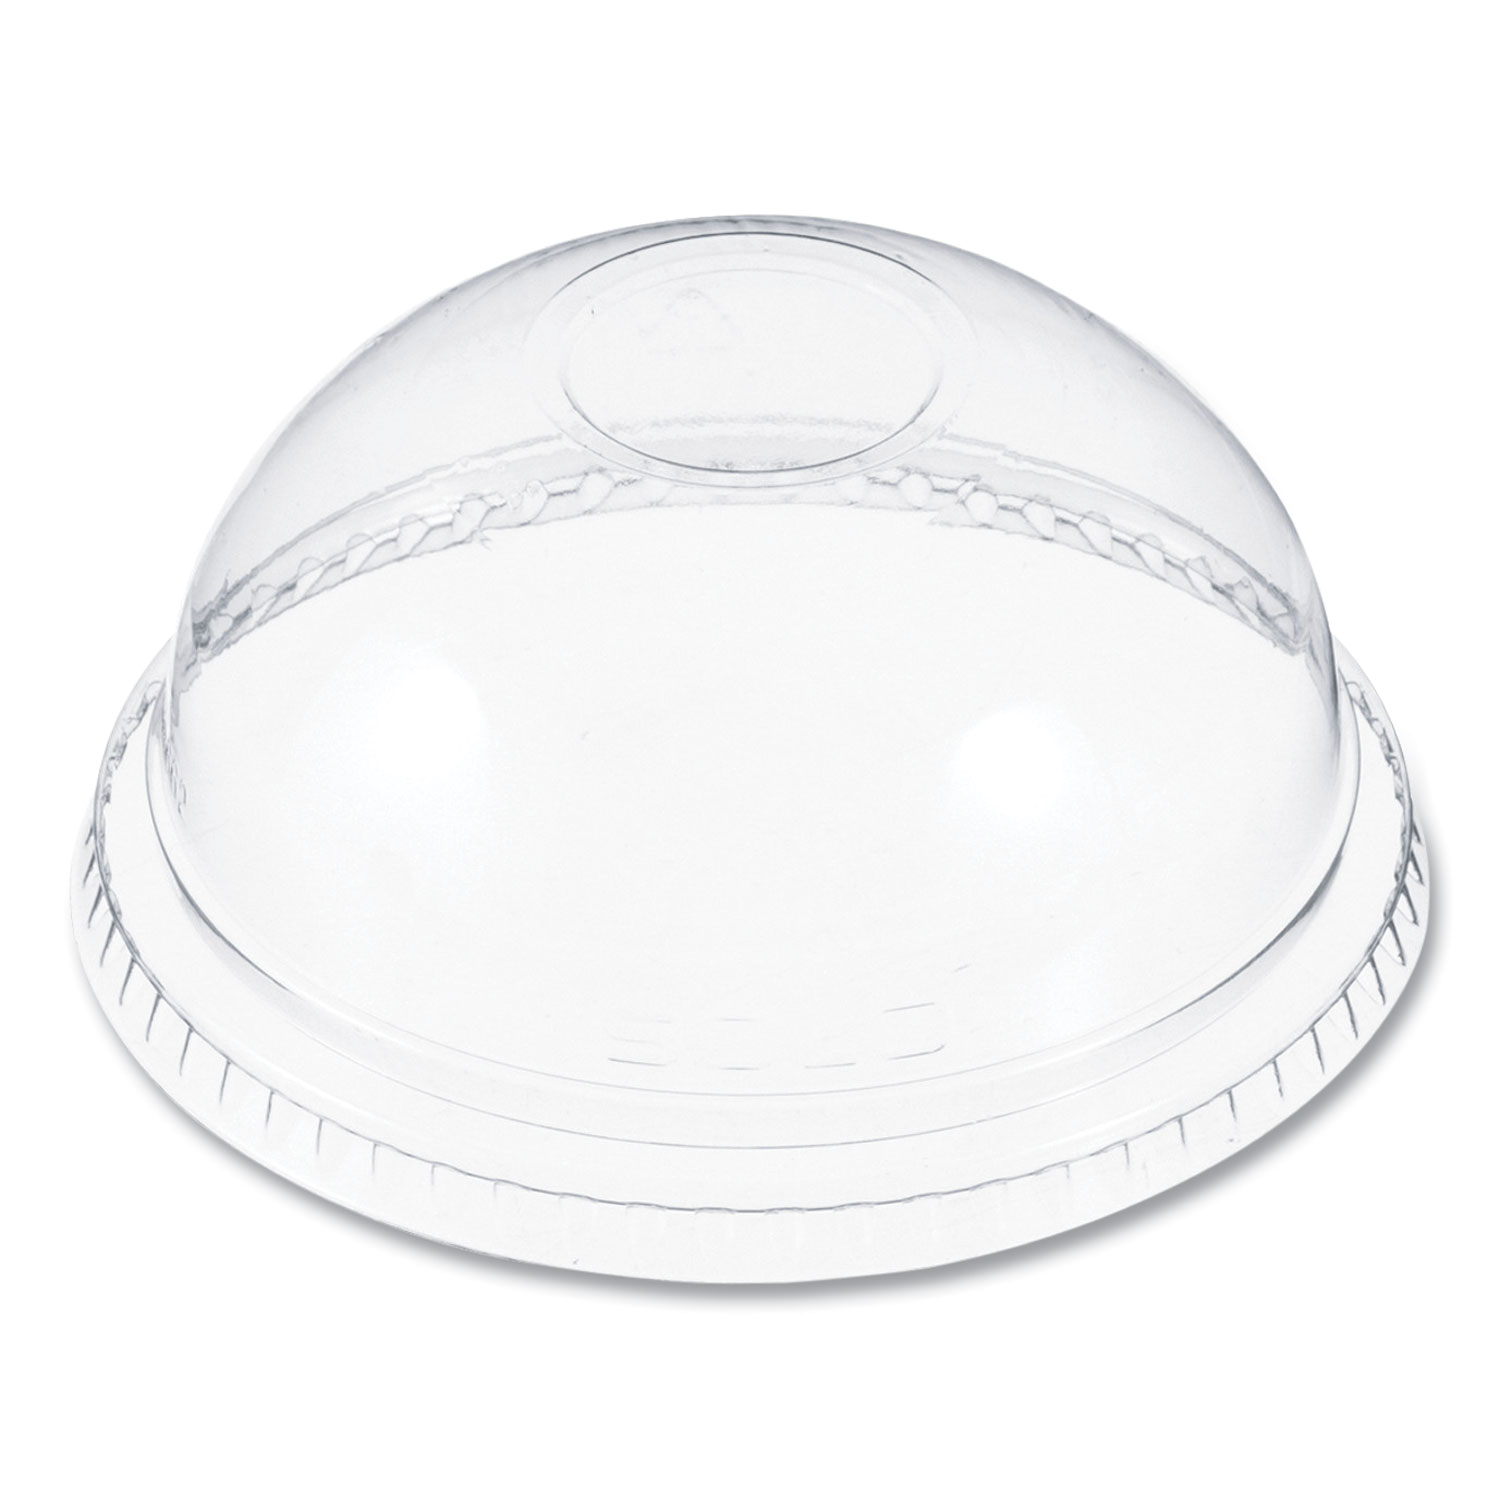 Plastic Dome Lid, No-Hole, Fits 9 oz to 22 oz Cups, Clear, 100/Sleeve, 10  Sleeves/Carton - Zerbee